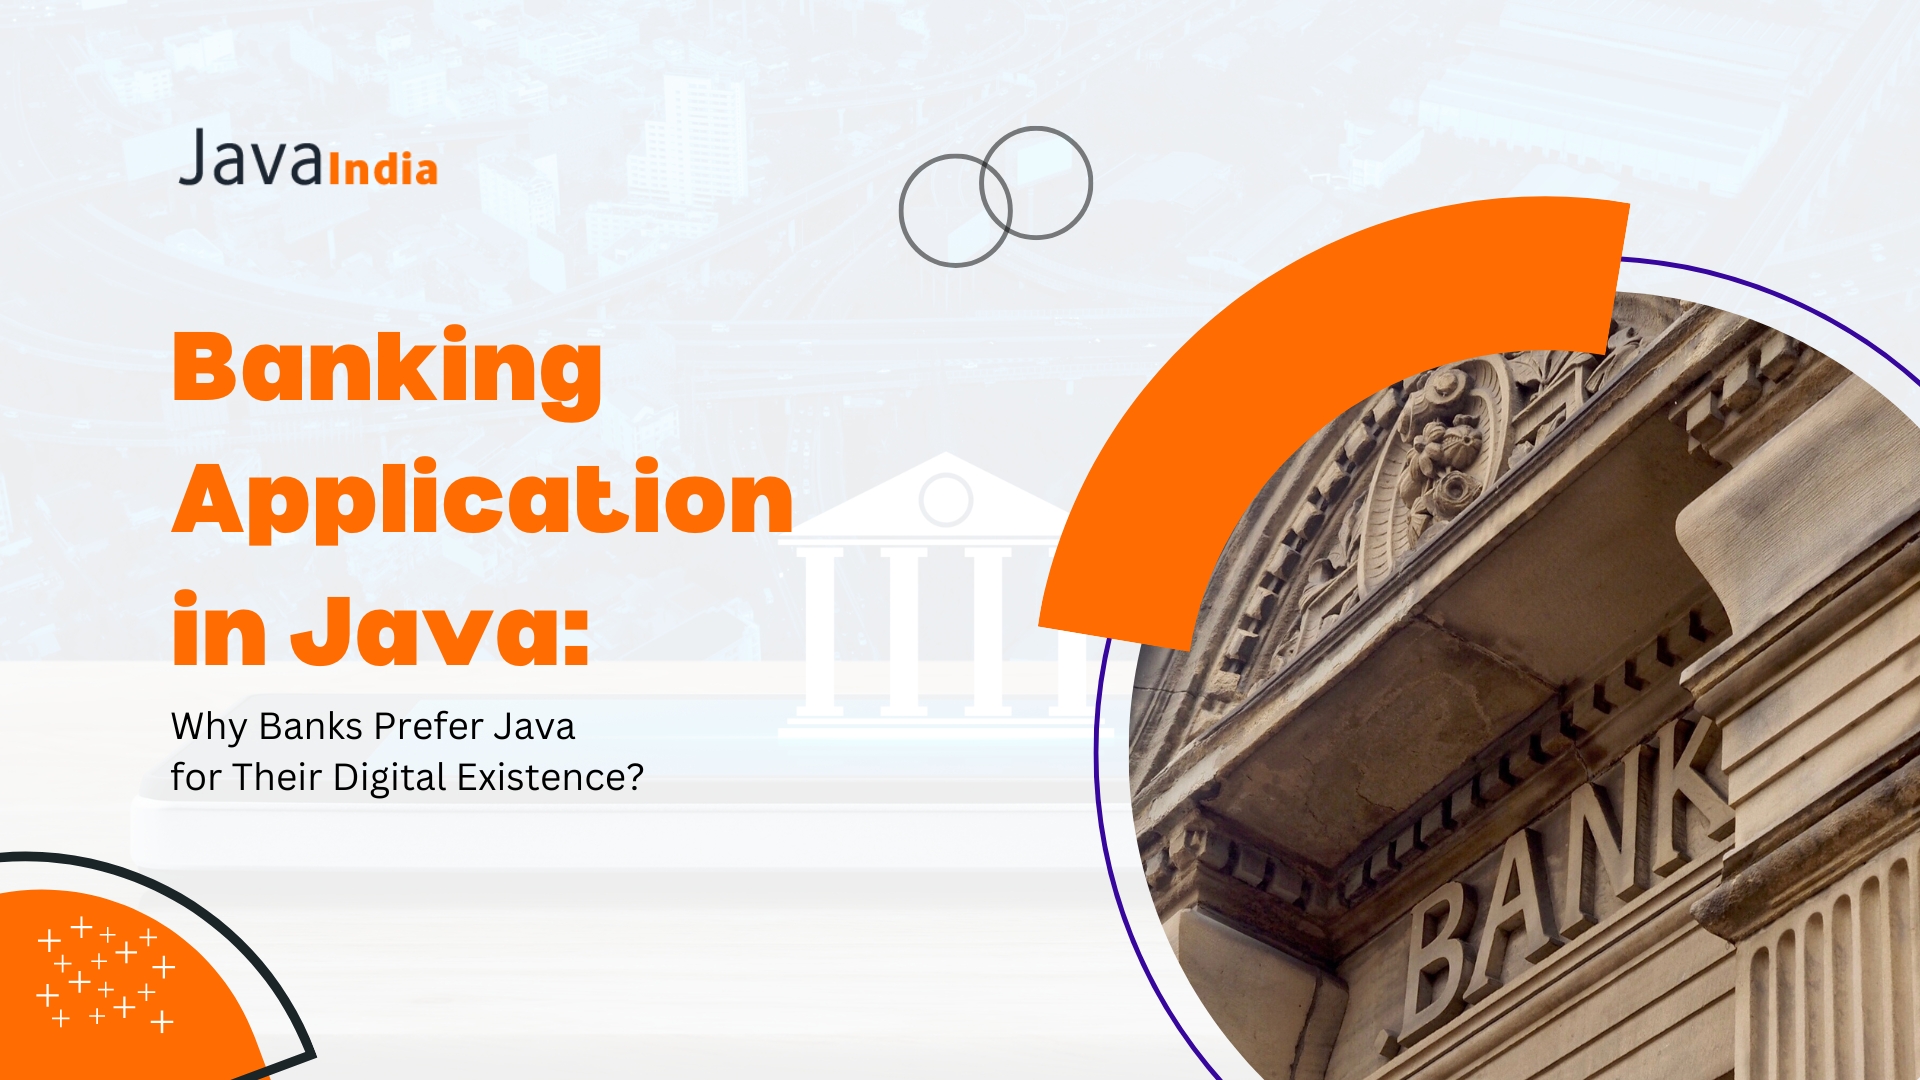 Banking Application in Java: Why Banks Prefer Java for Their Digital Existence?